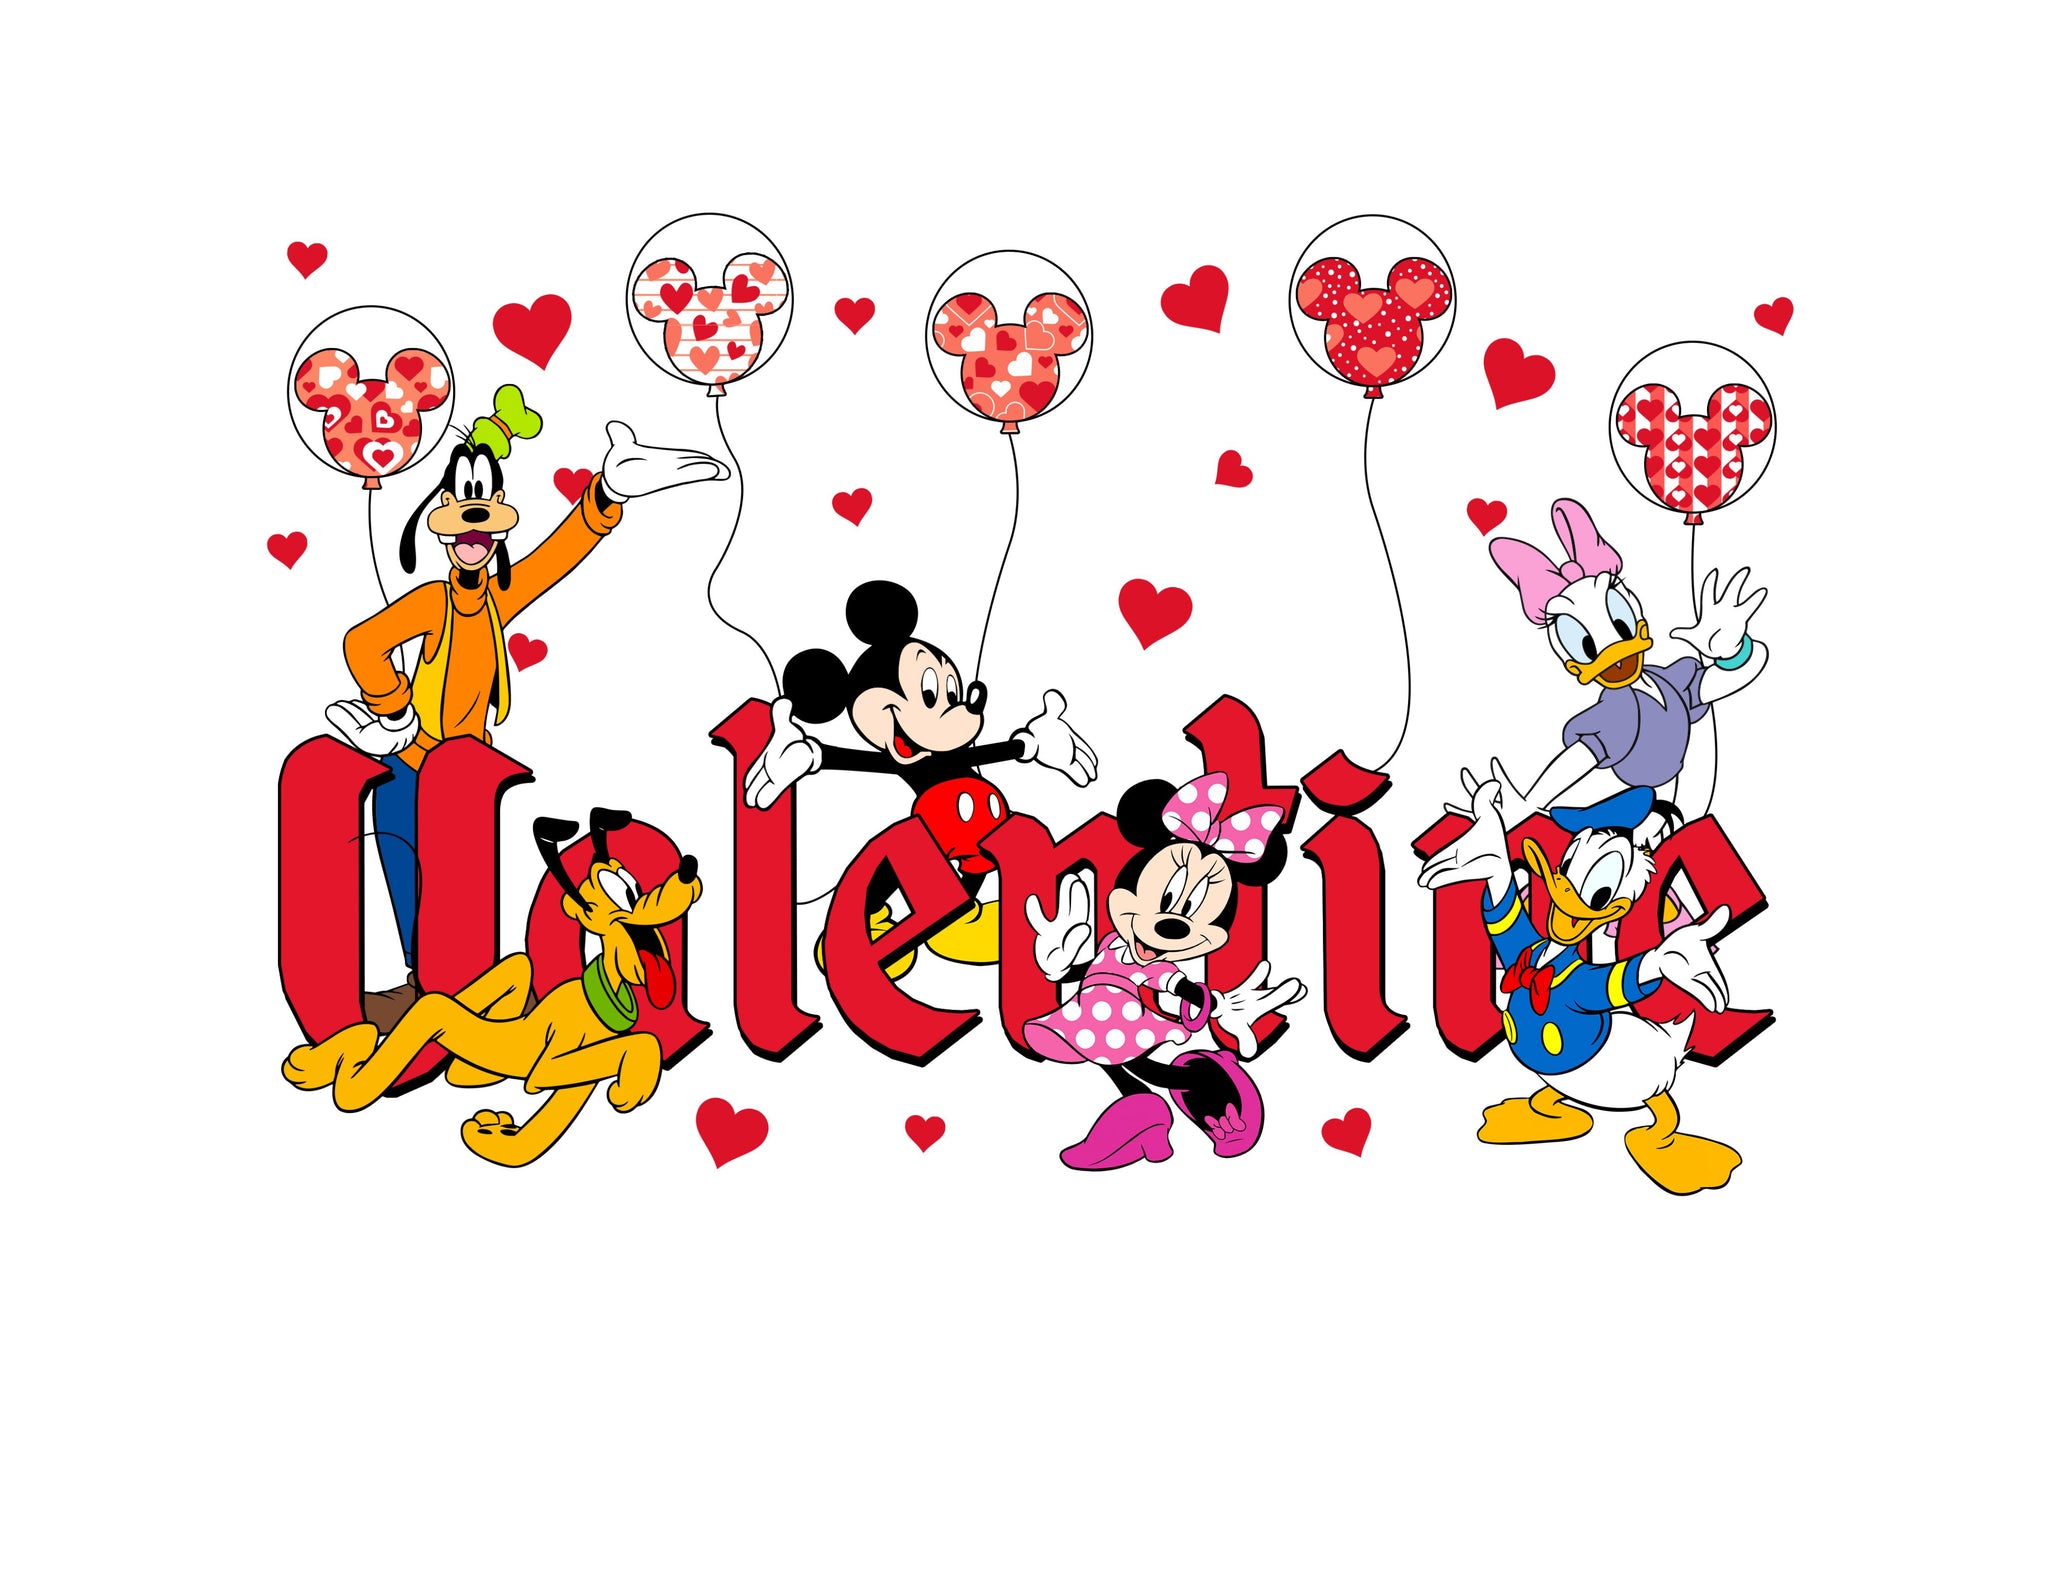 Disney Valentine's Day Sublimation PNG - Mouse and Friends Collection